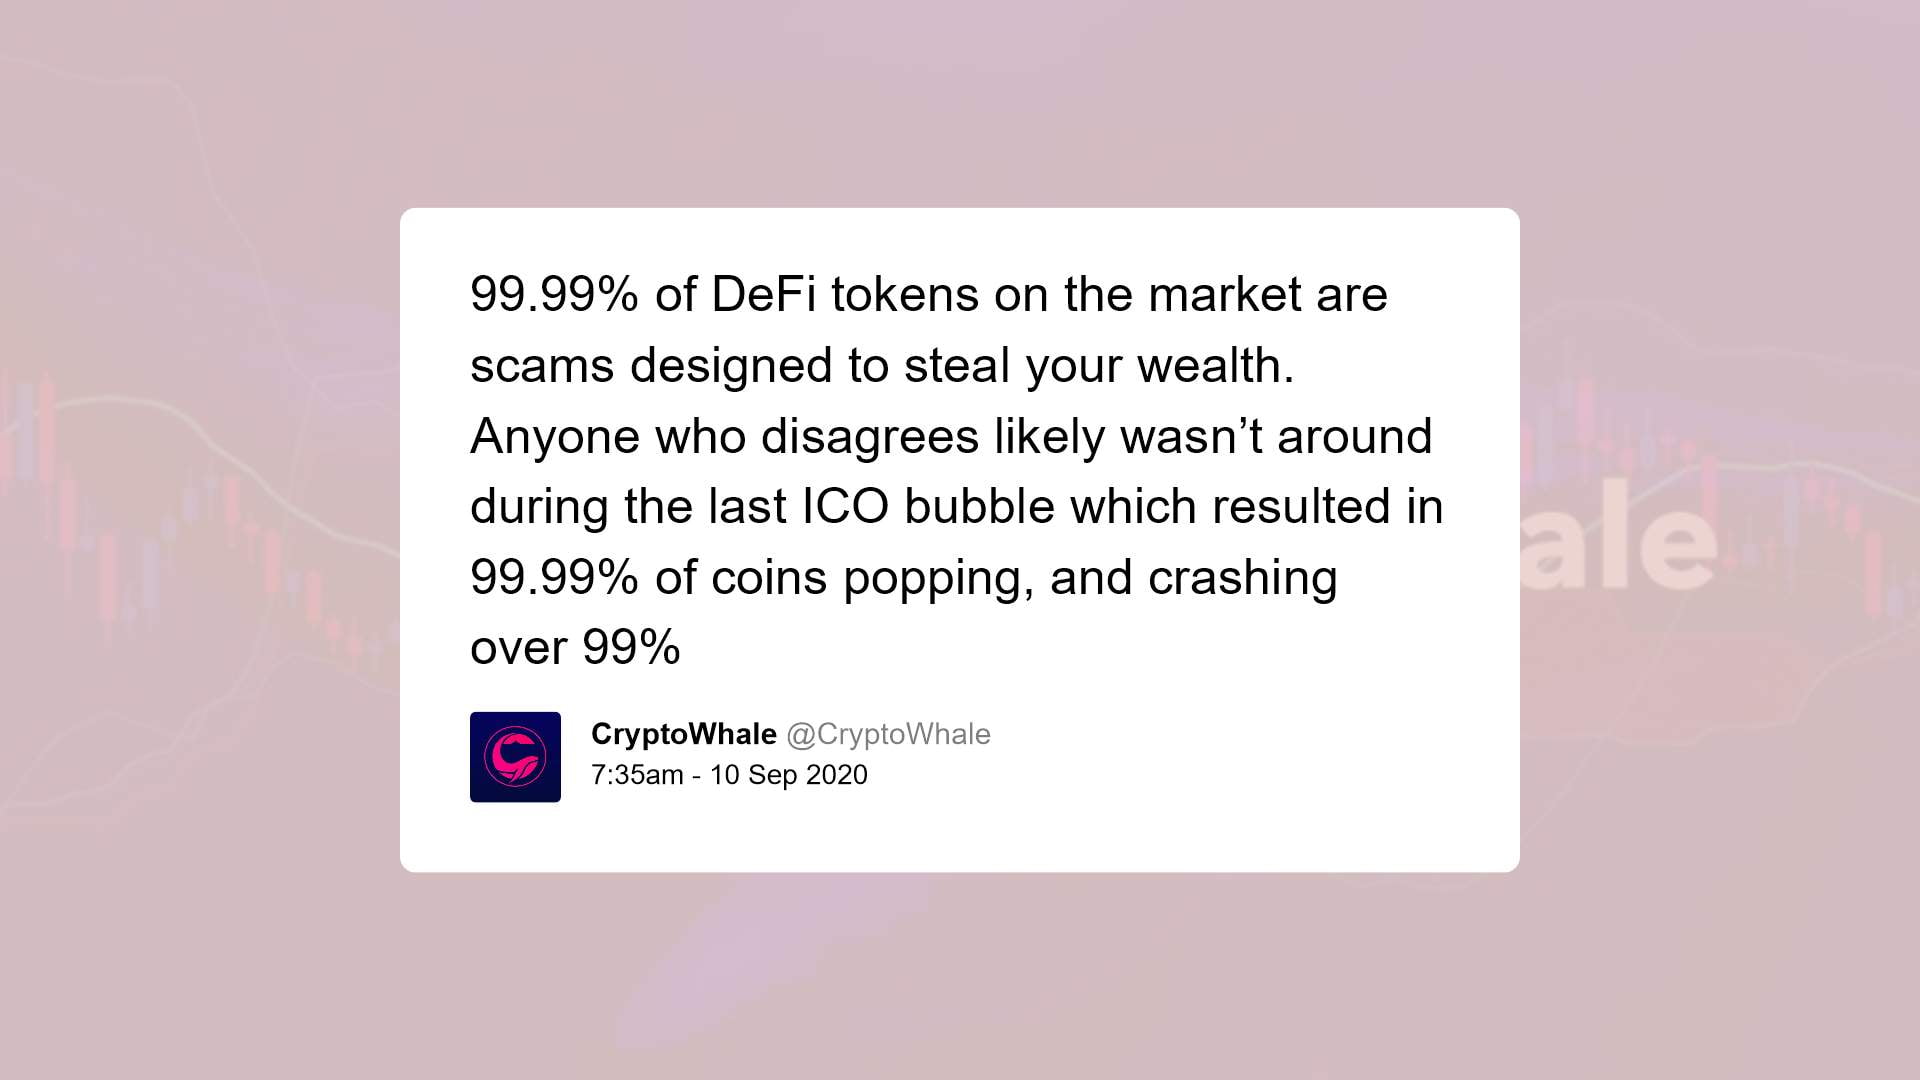 @CryptoWhale warning of DeFi scams